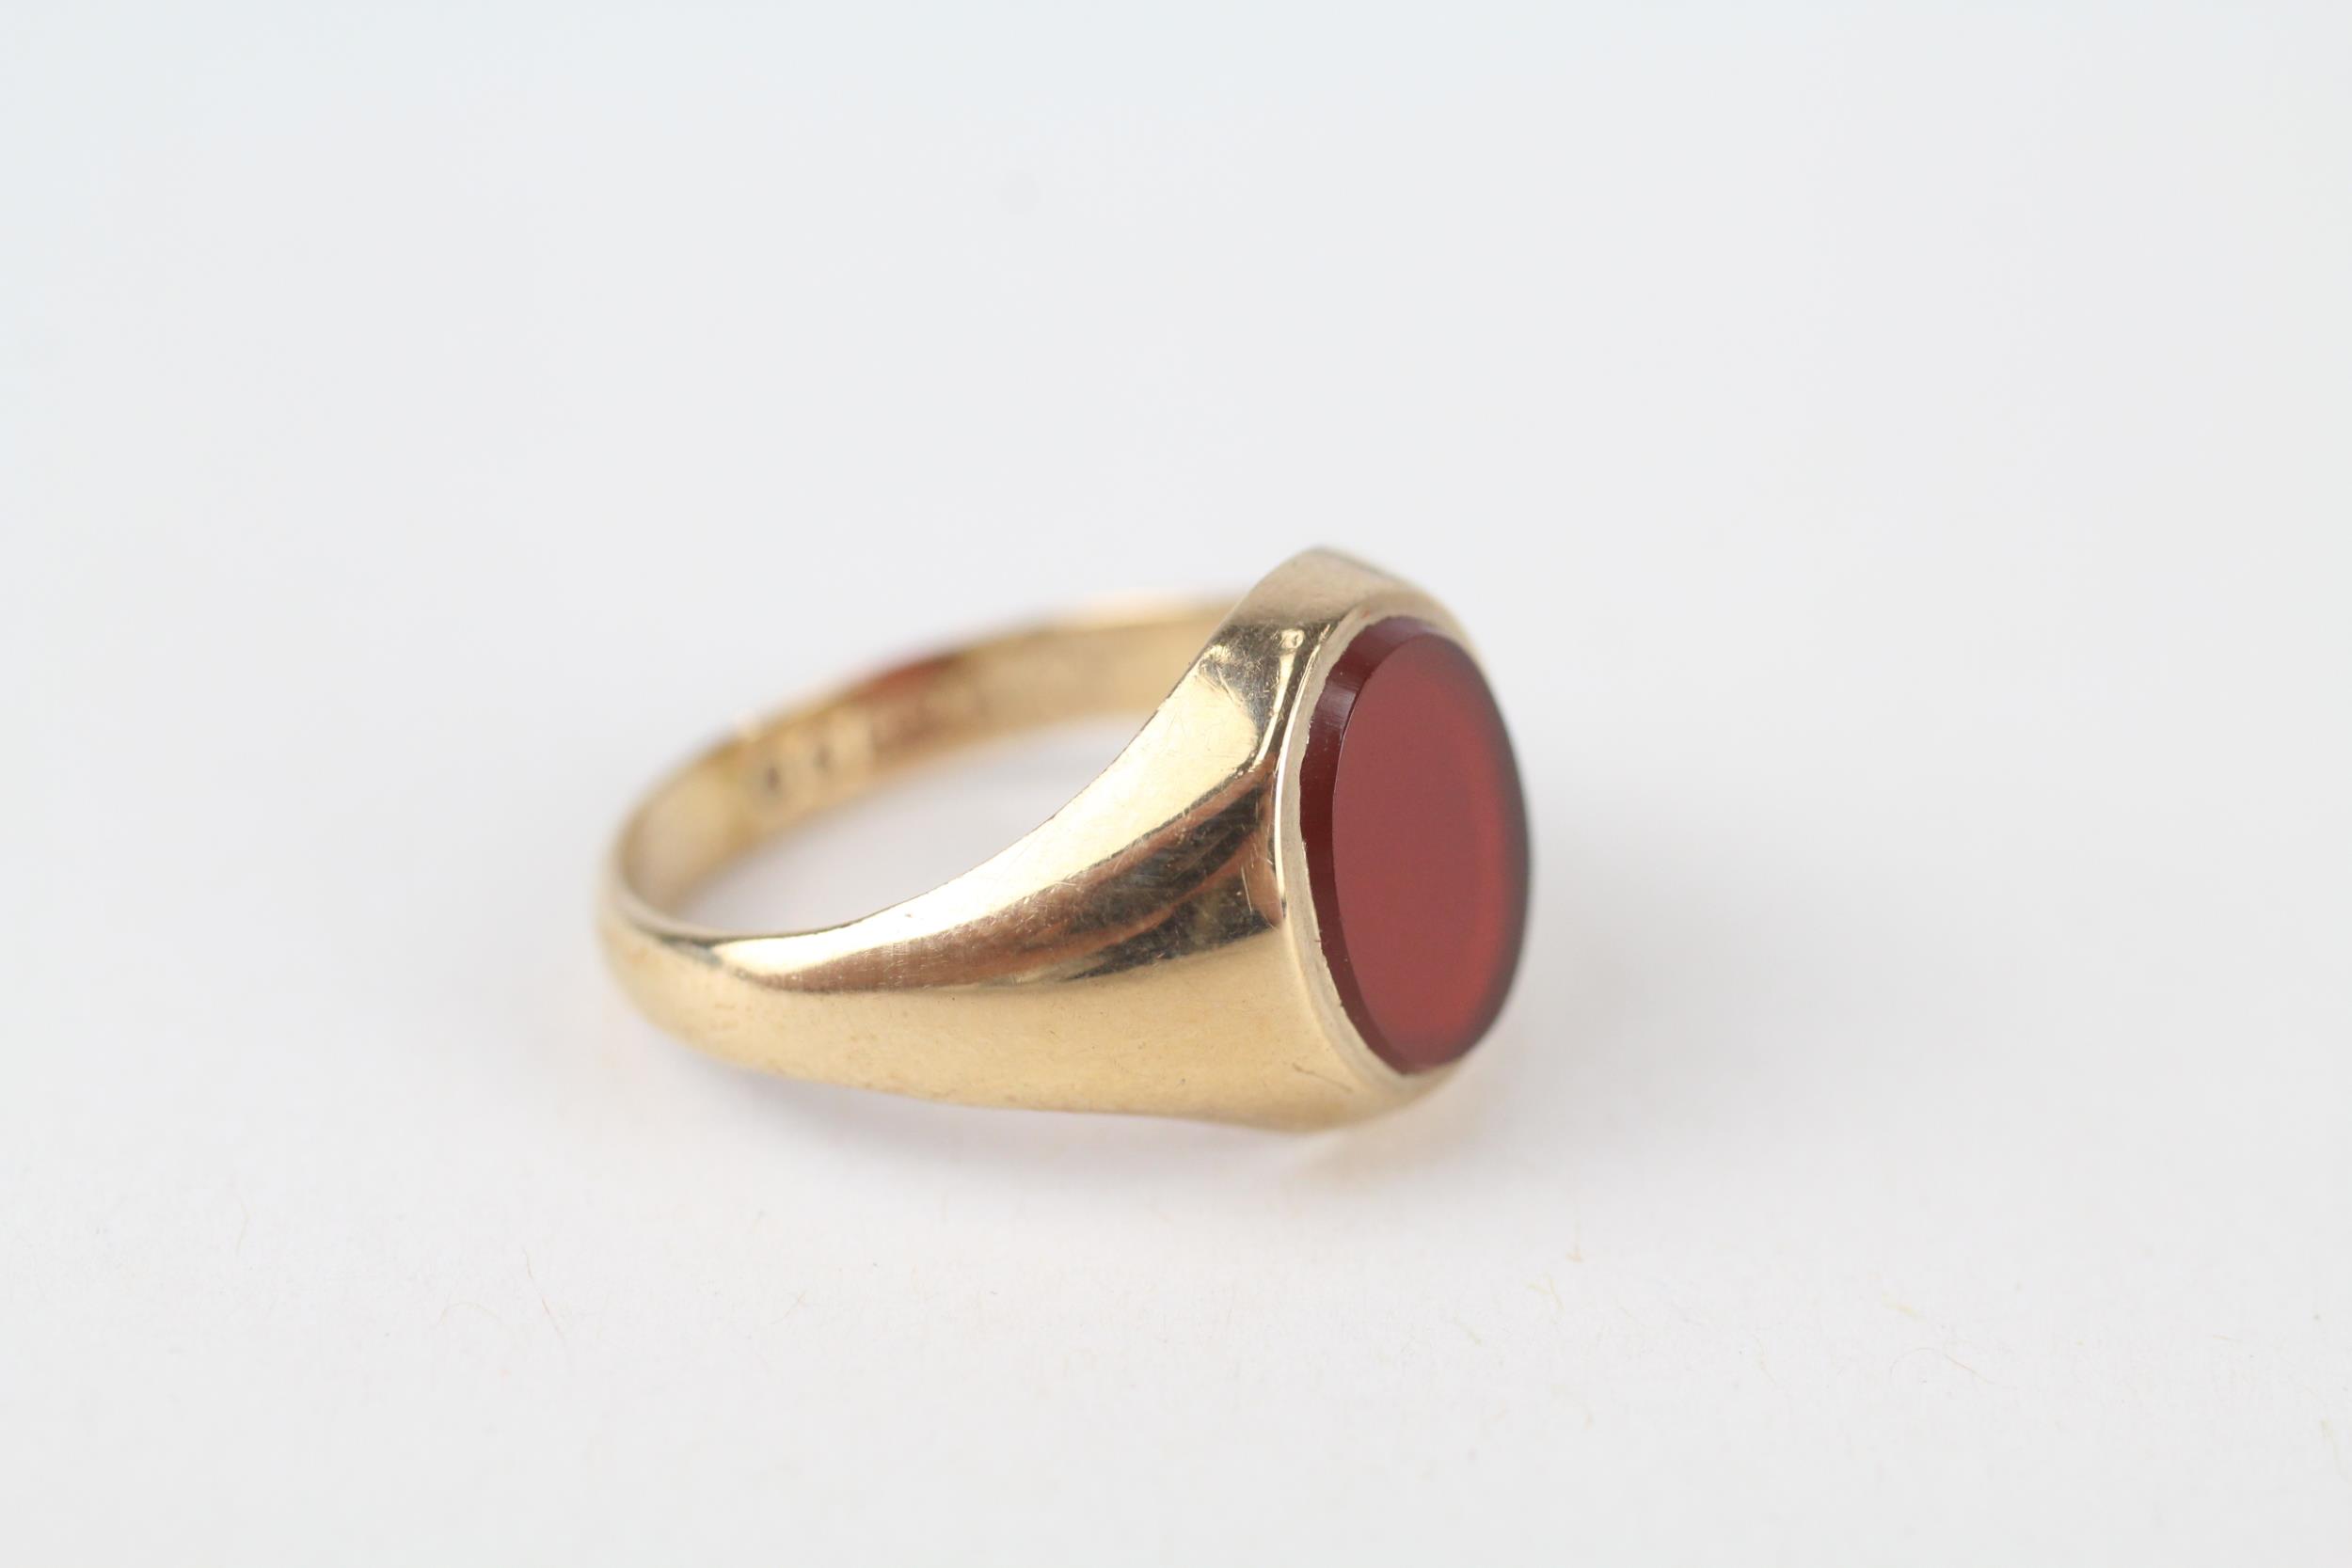 9ct oval carnelian signet ring Size K 2.8 g - Image 7 of 9